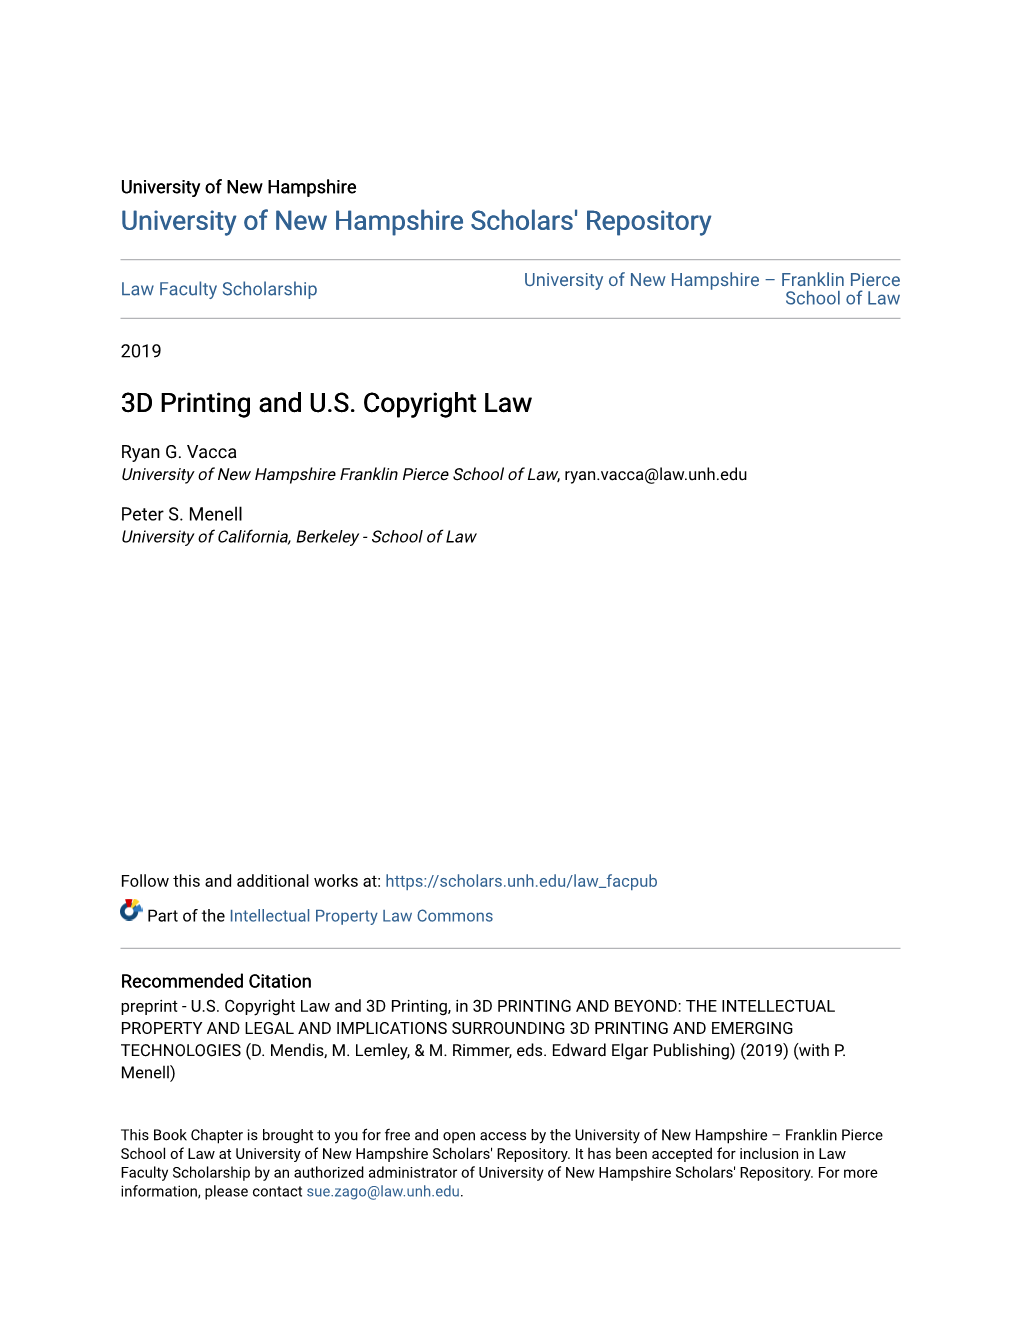 3D Printing and U.S. Copyright Law